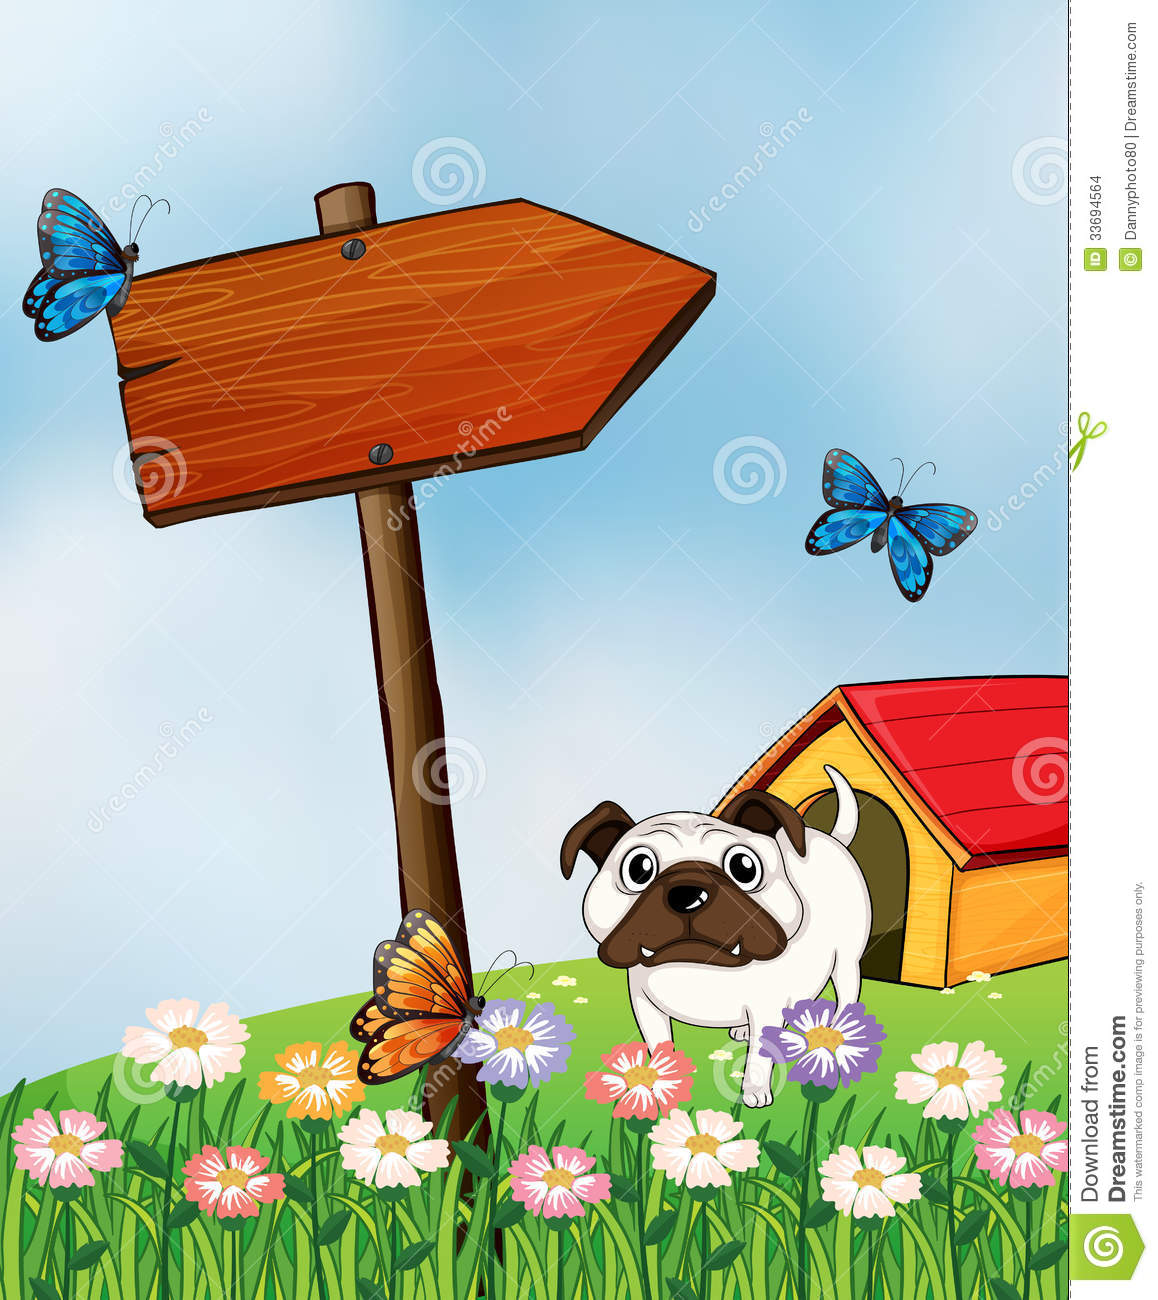 Bulldog And The Three Colorful Butterflies Stock Images   Image